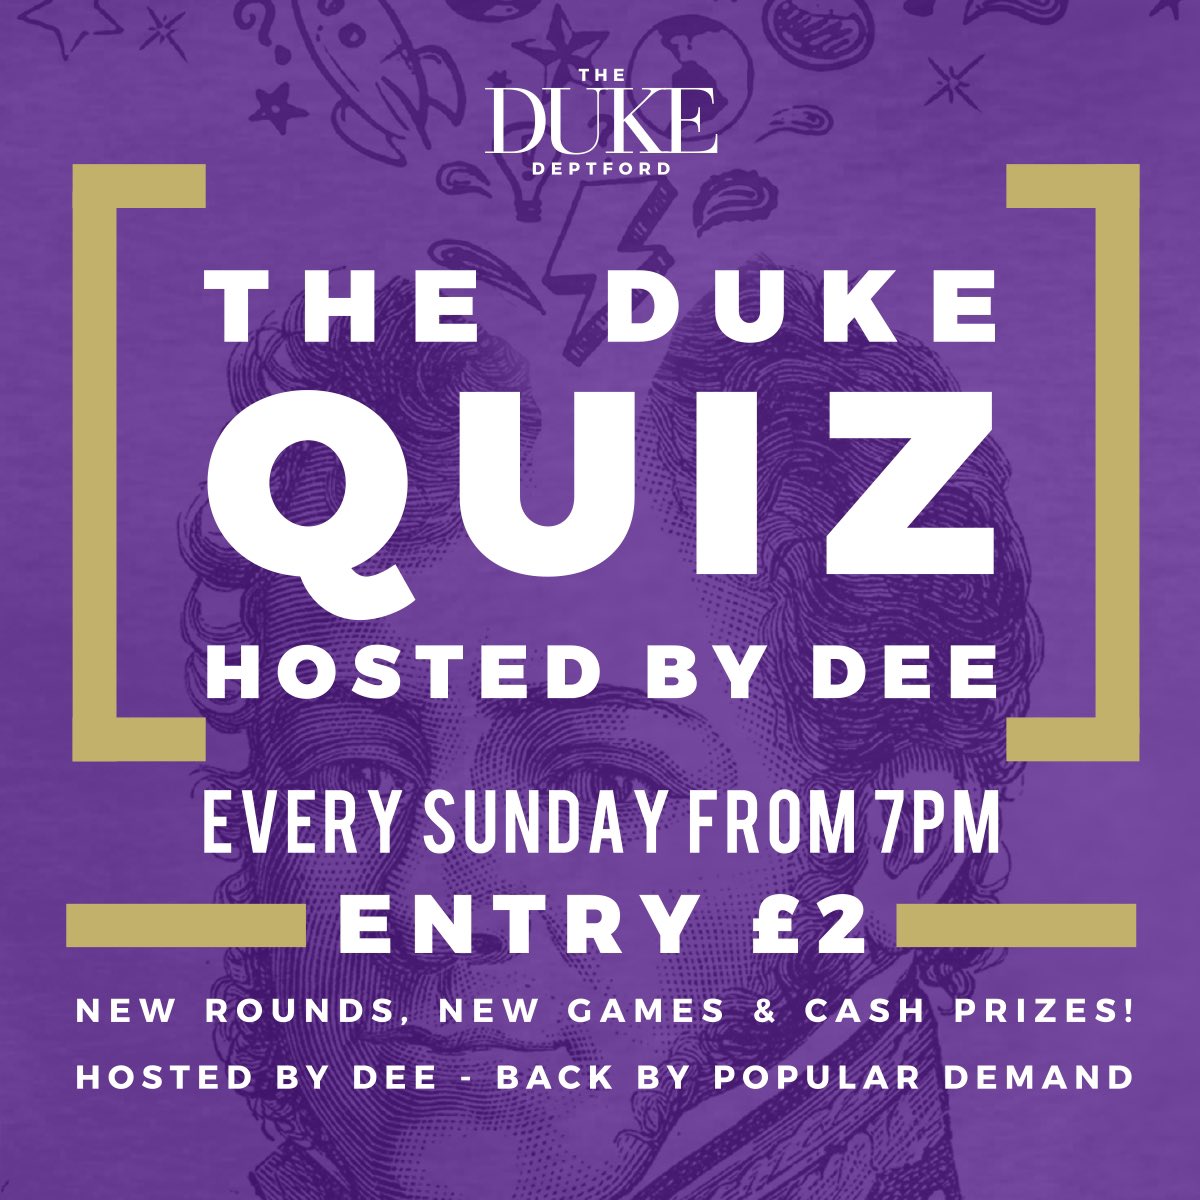 TheDukeDeptford tweet picture